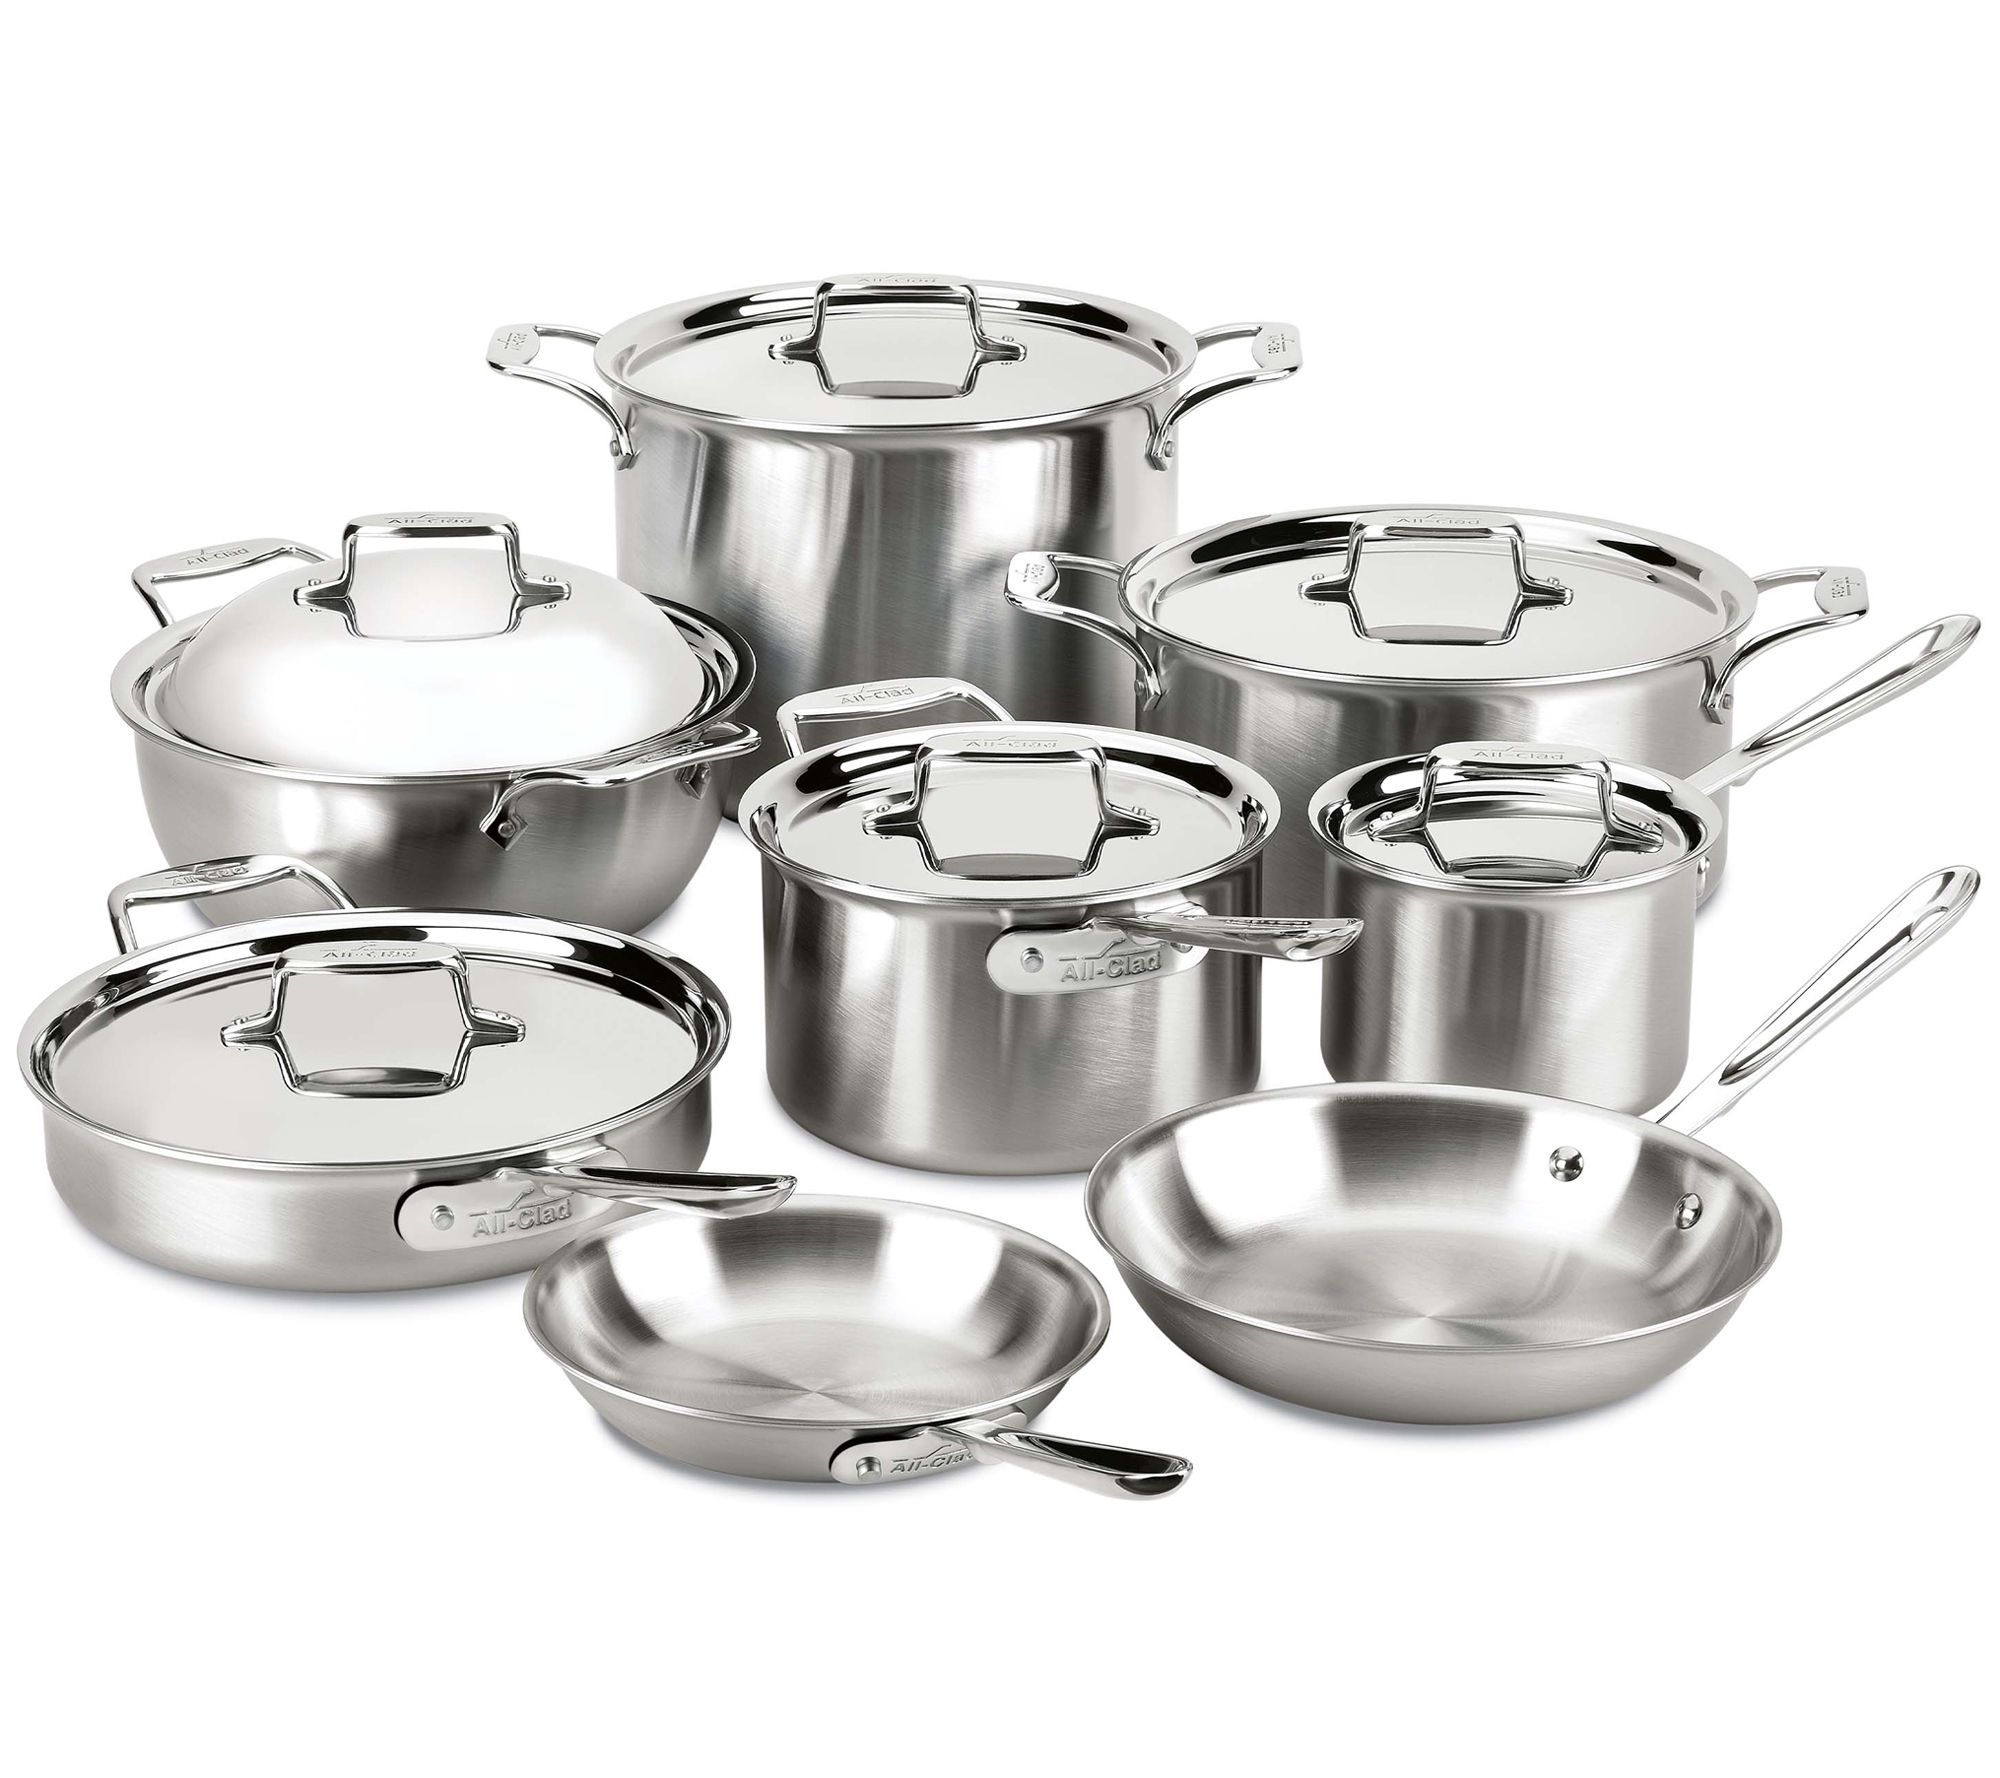 Stainless Steel Bakeware I All-Clad